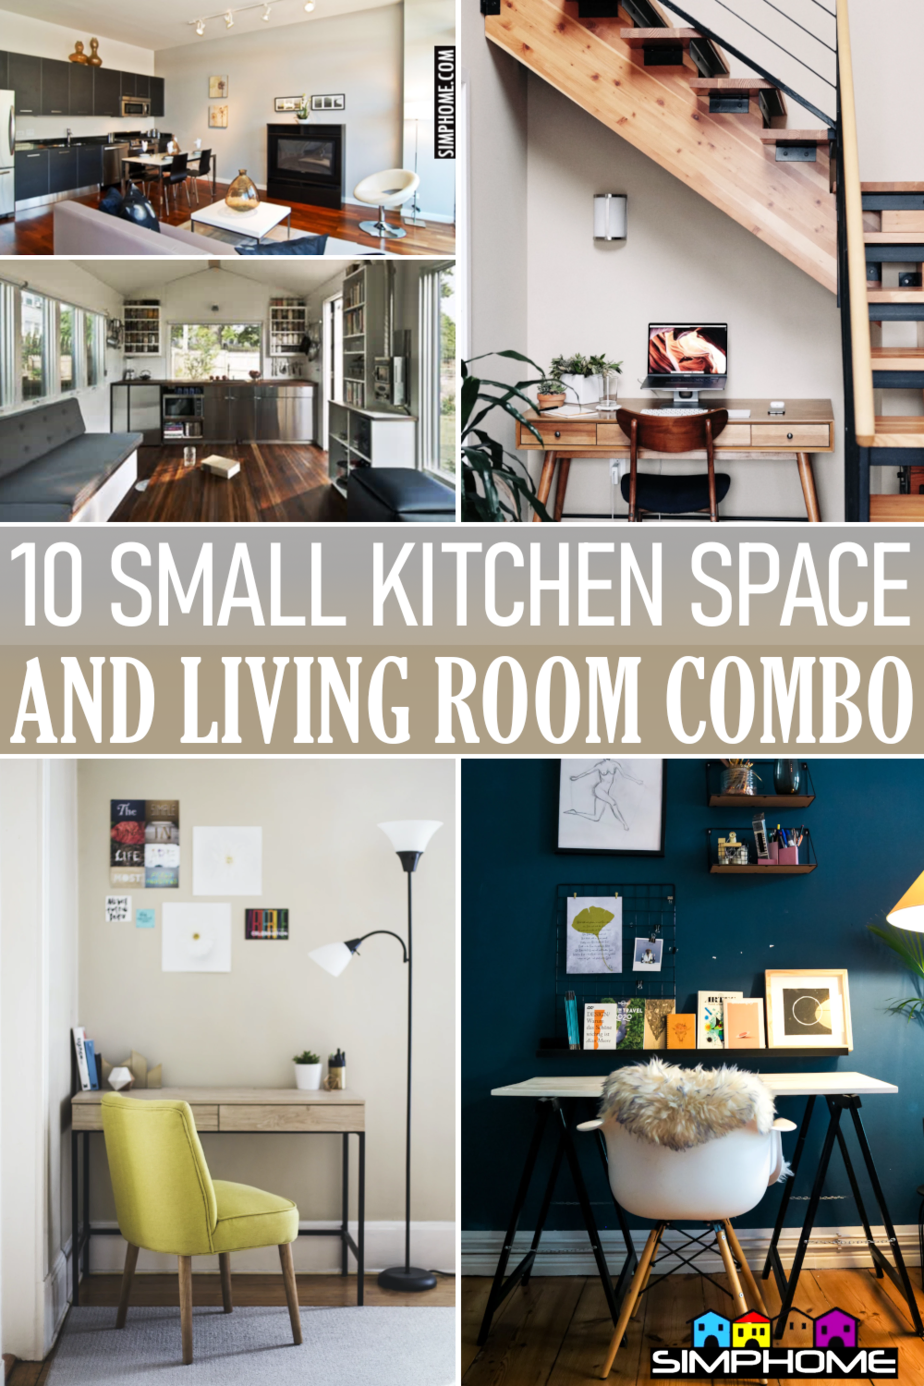 10 small kitchen living room combo via Simphome.comFeatured